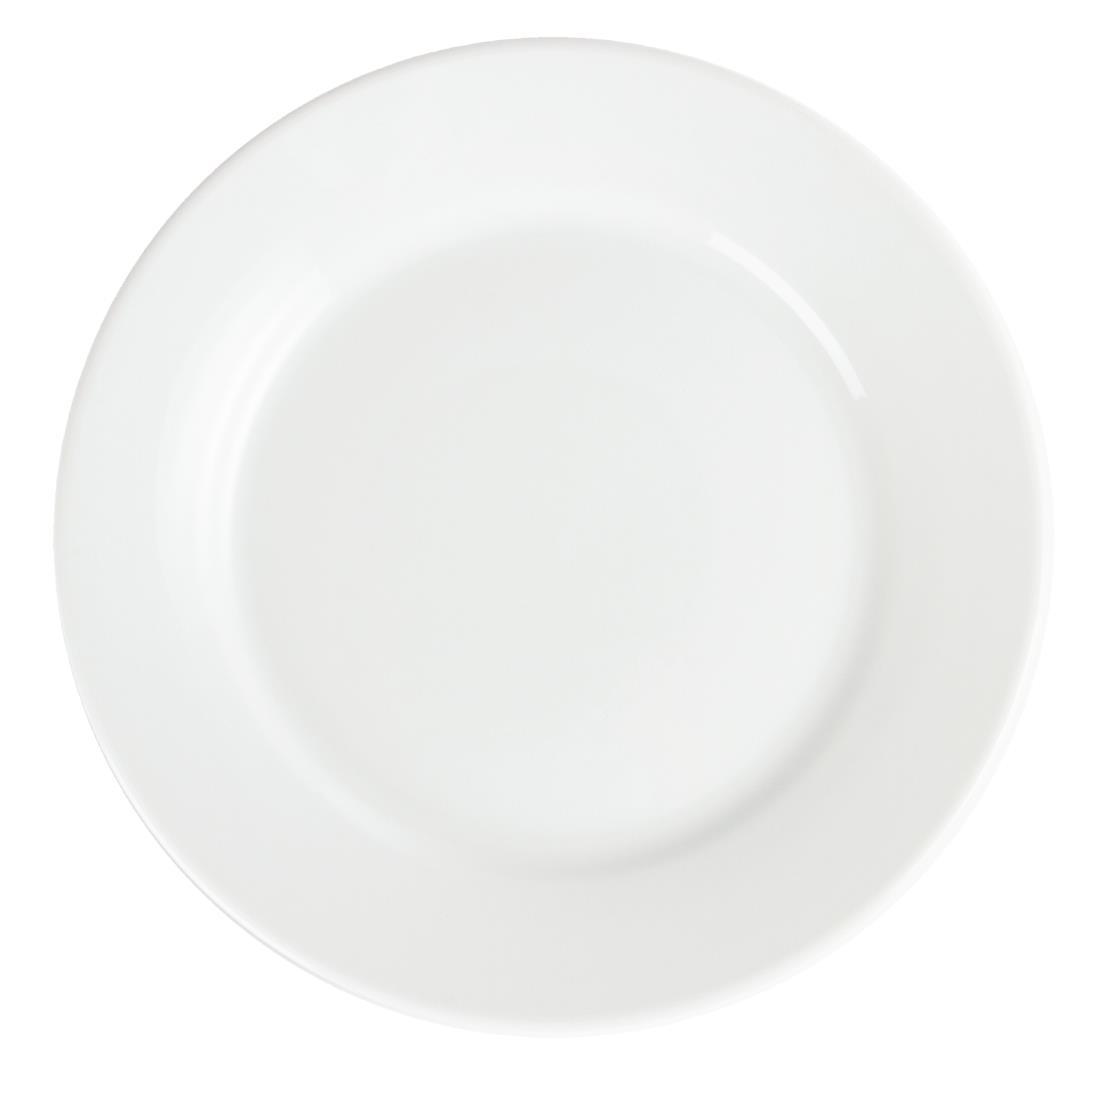 Olympia Whiteware Wide Rimmed Plates 250mm (Pack of 12) - CB481  - 6